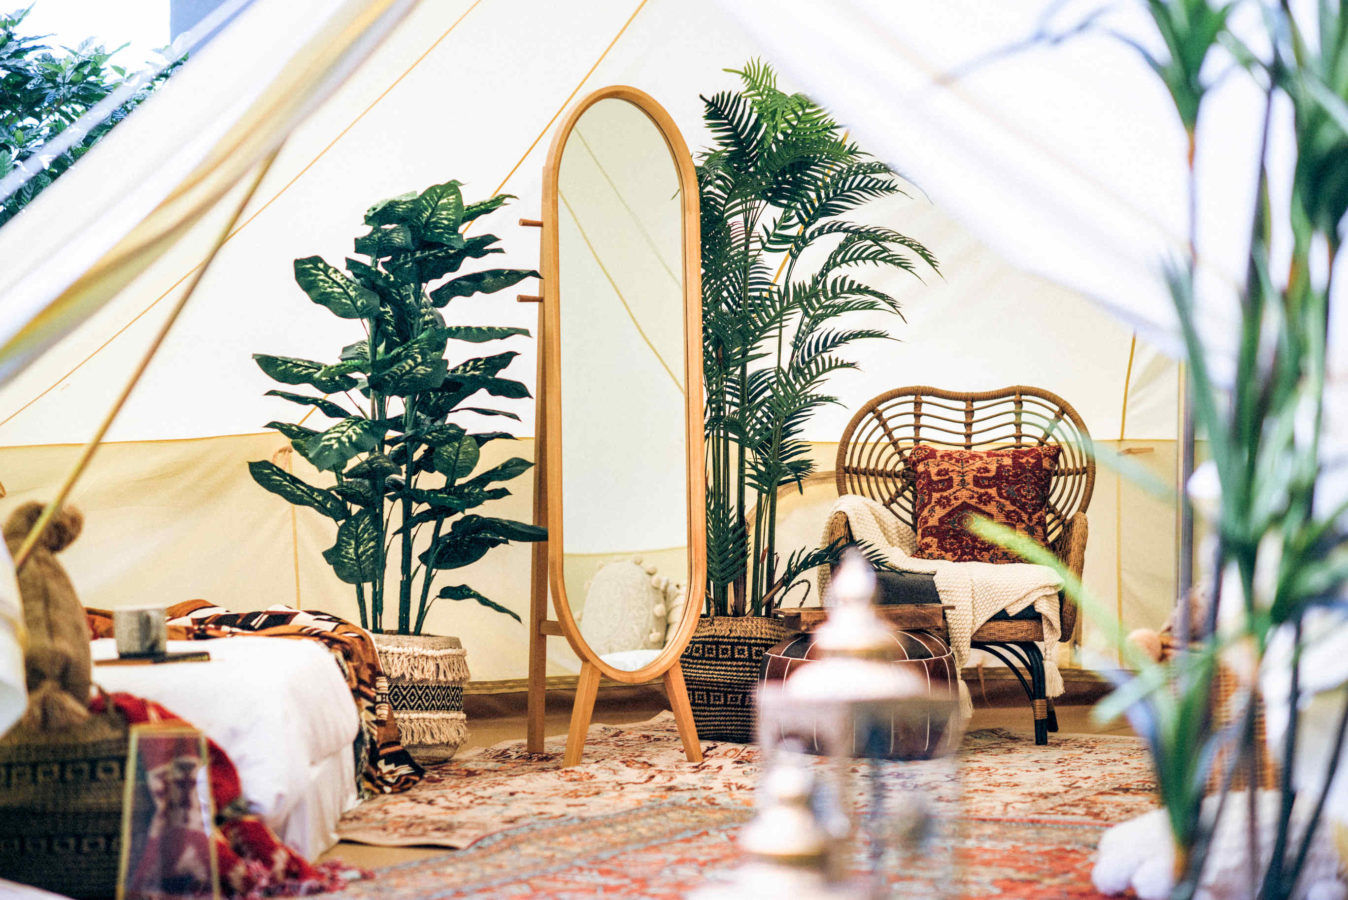 Now you can head into the city for a glamping experience at Castra by Colony